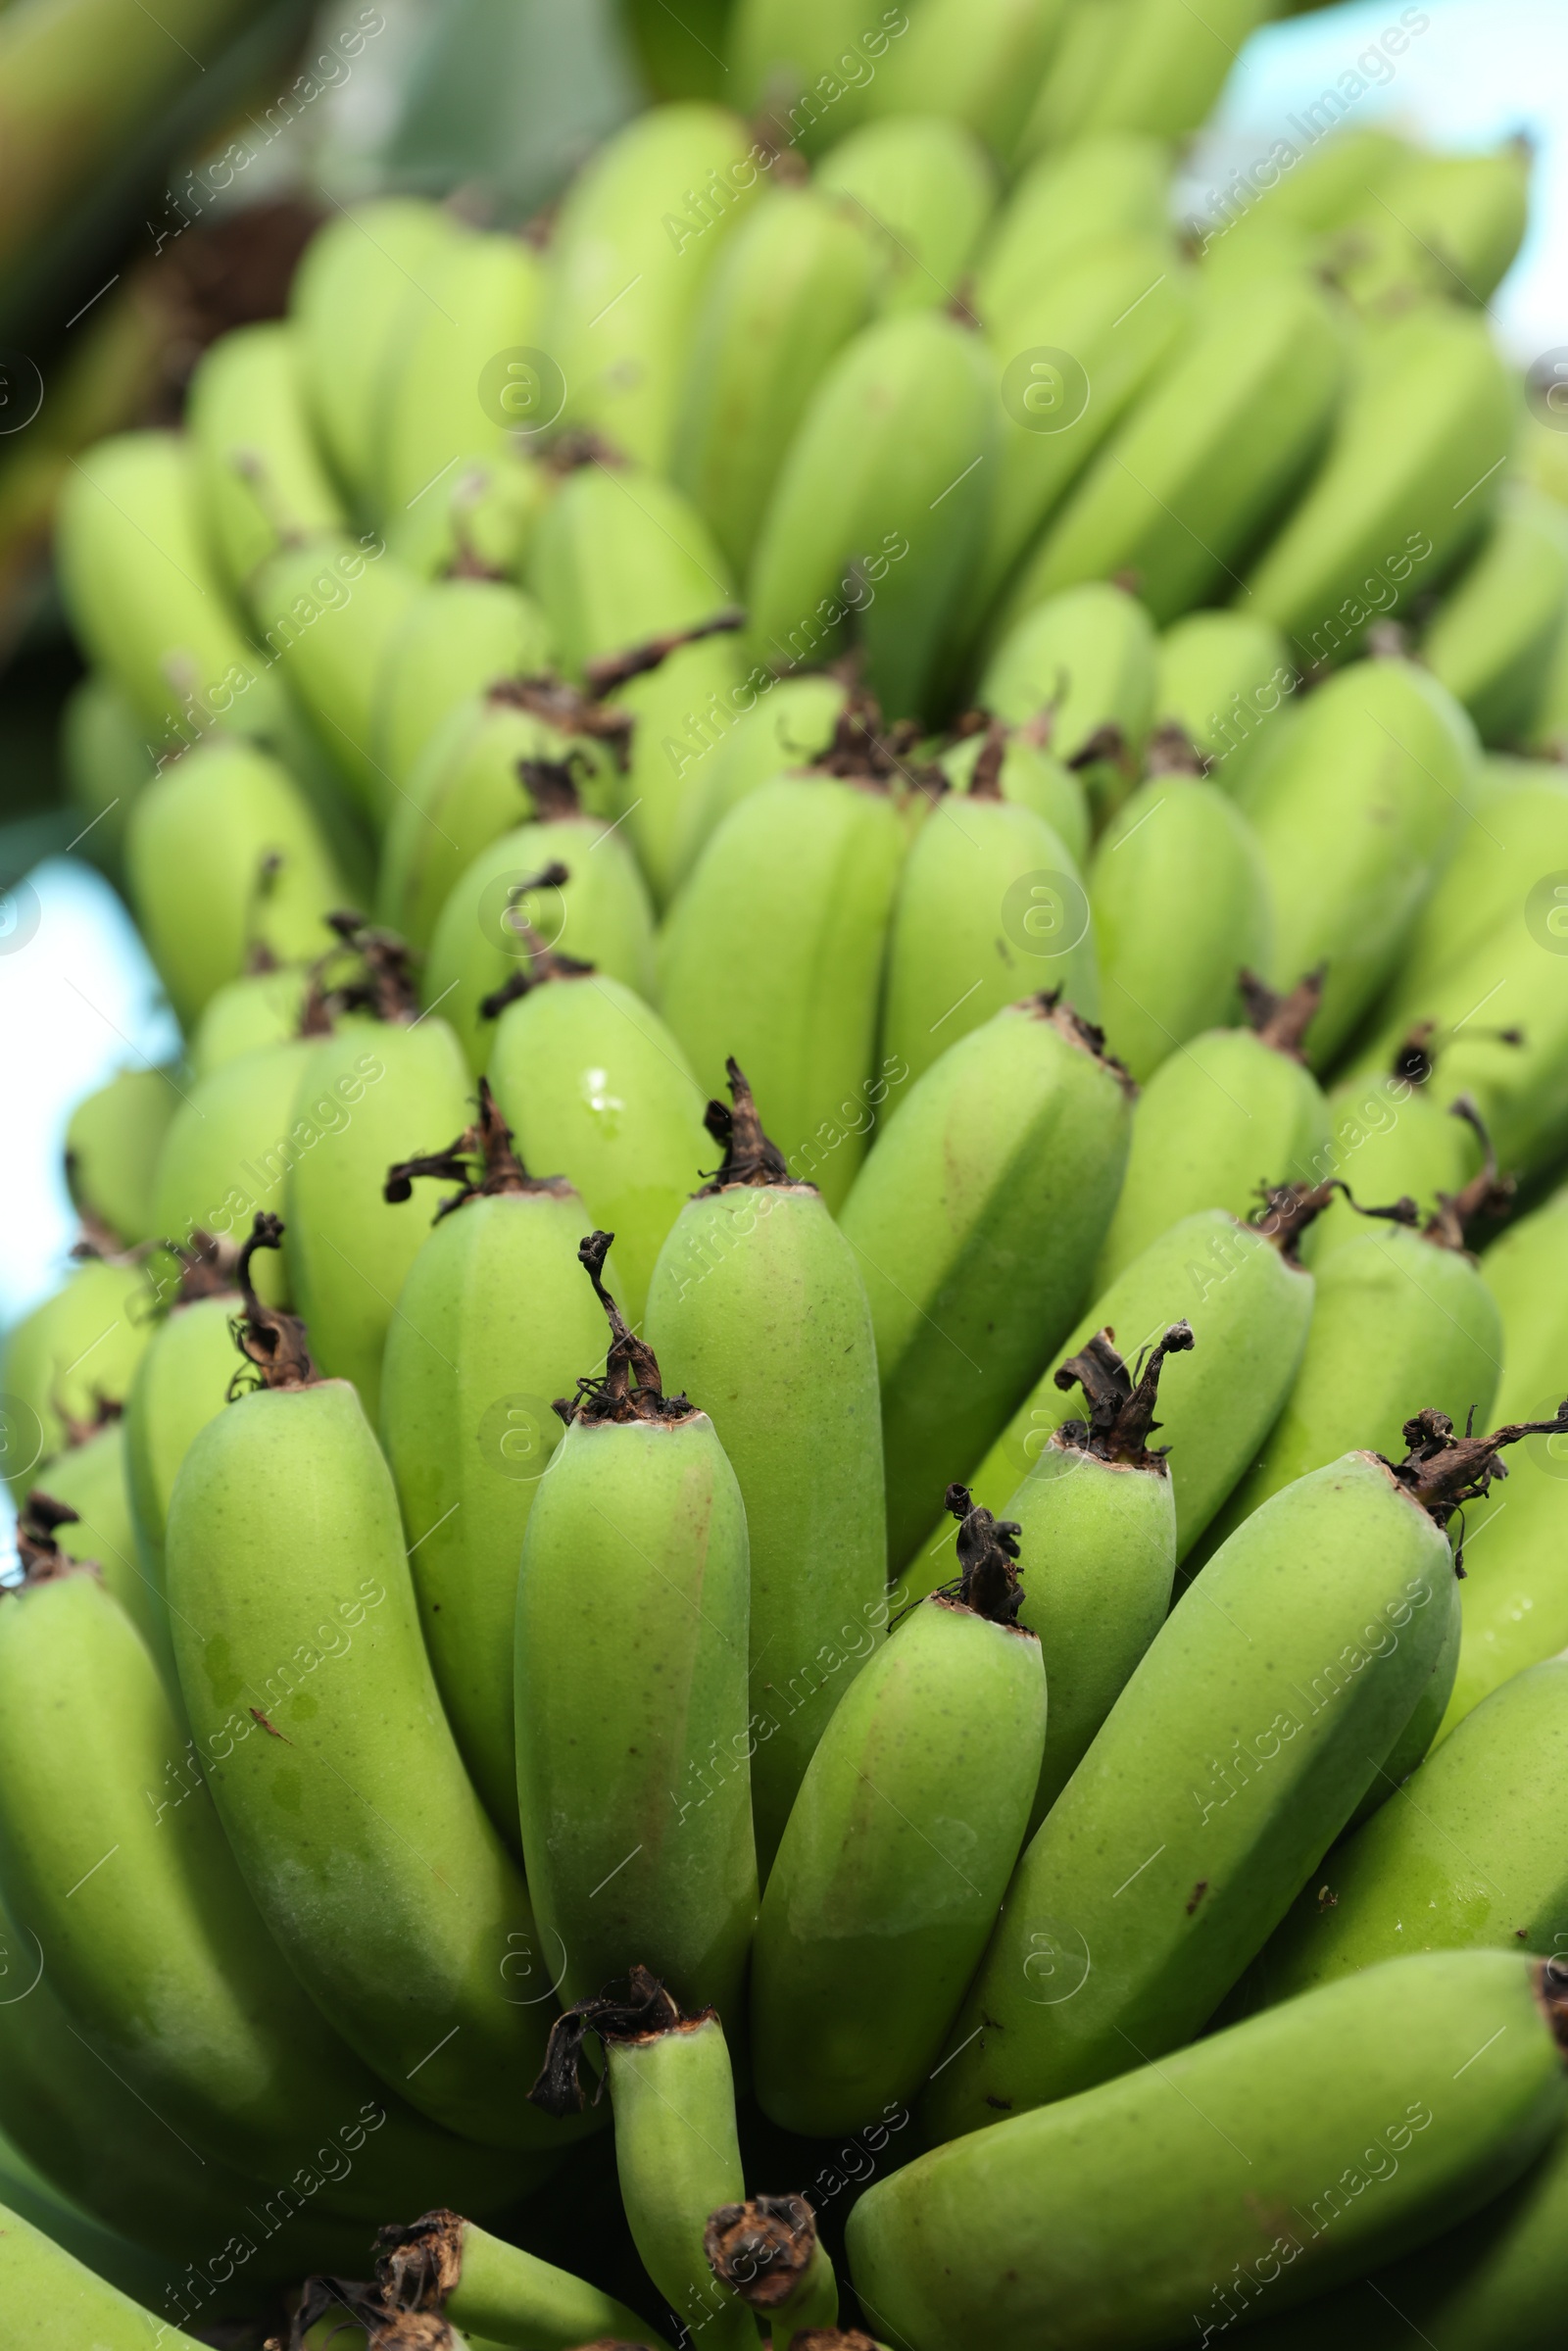 Photo of Unripe bananas growing on tree outdoors, low angle view